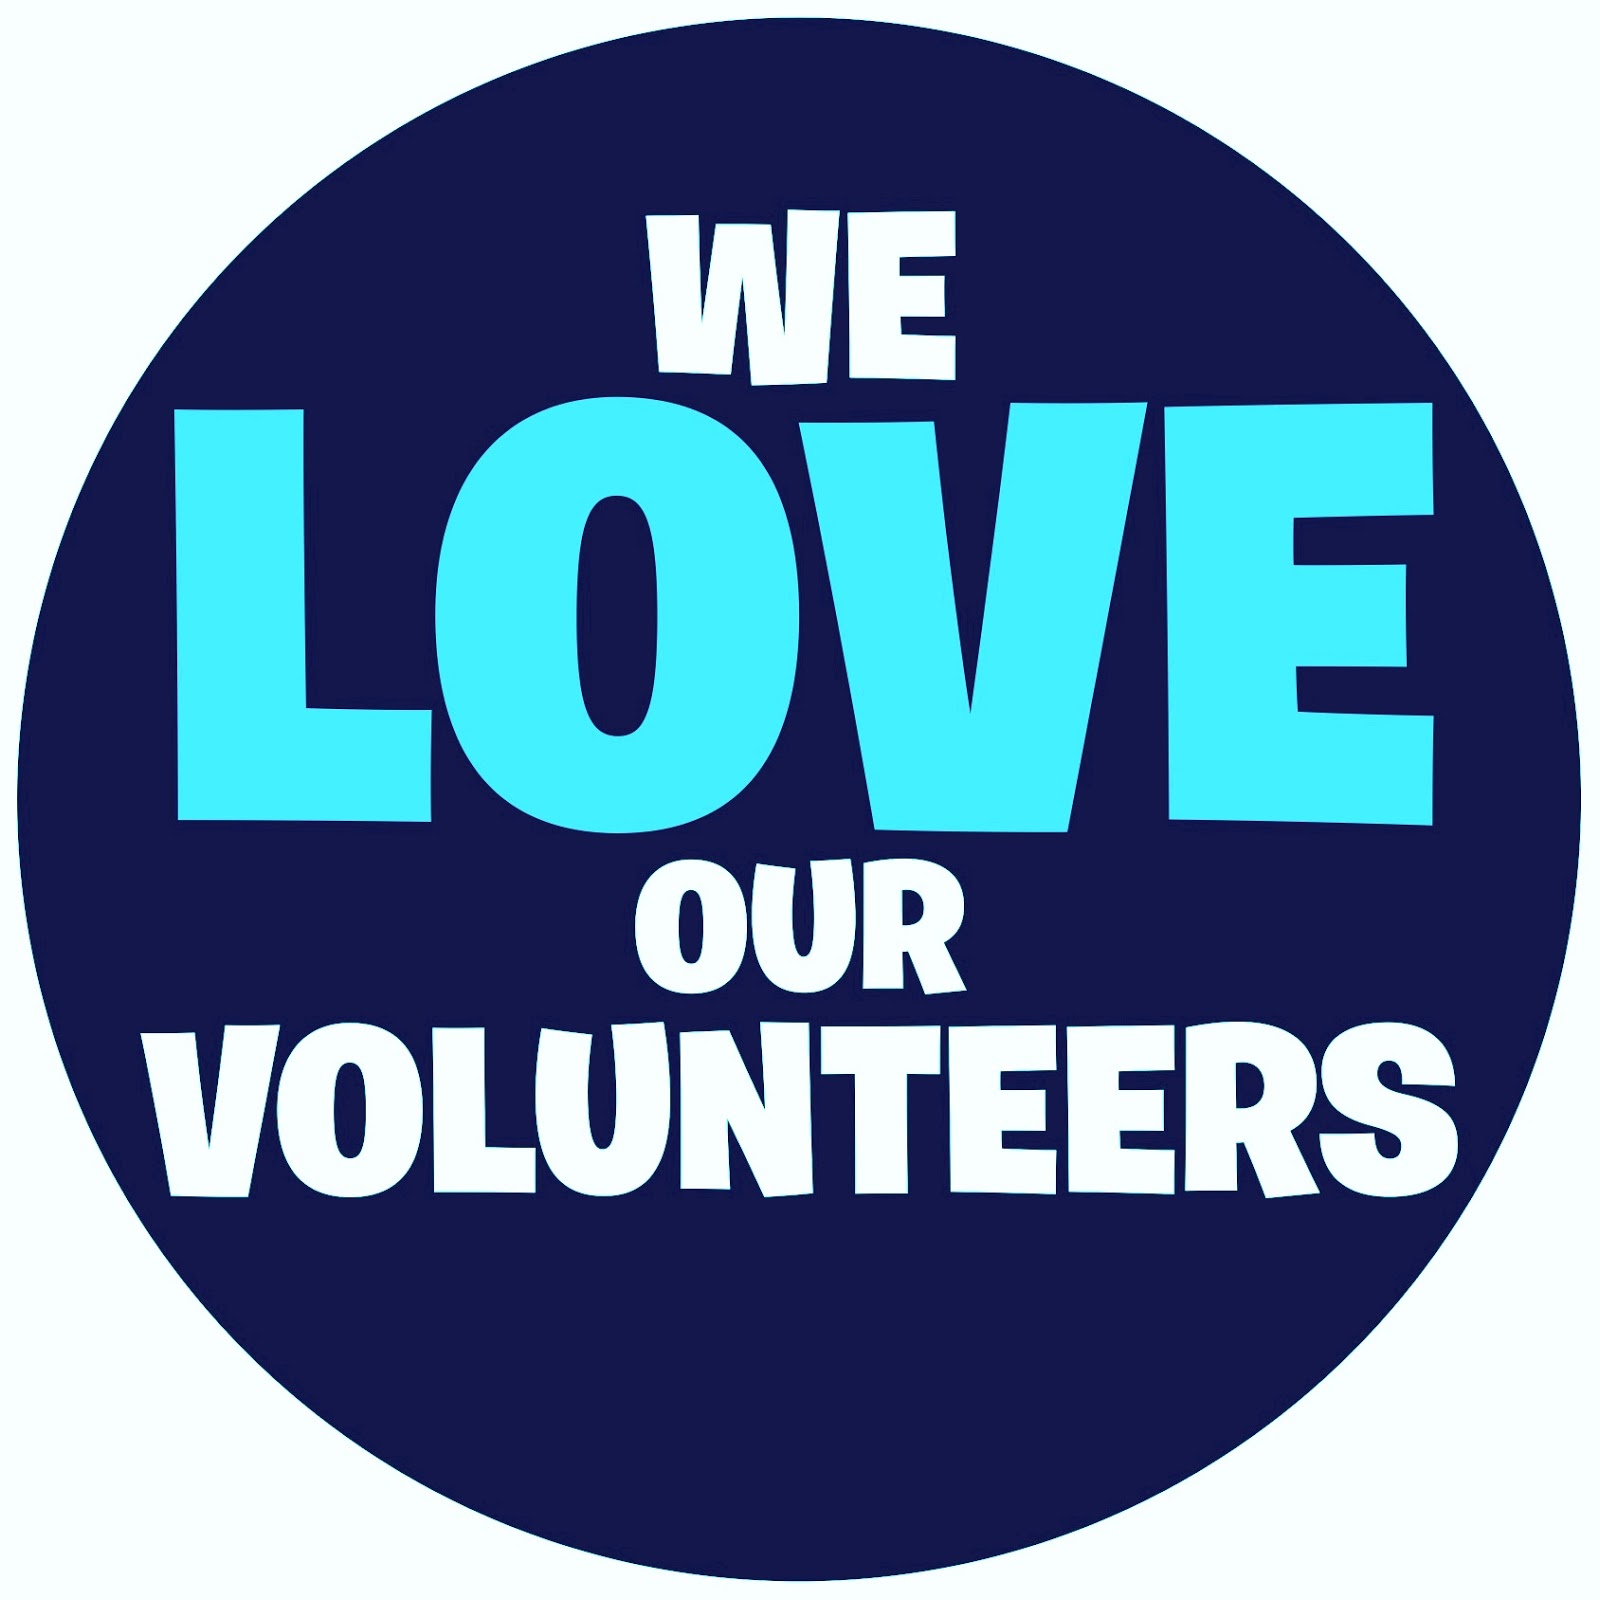 clipart images of volunteers - photo #26